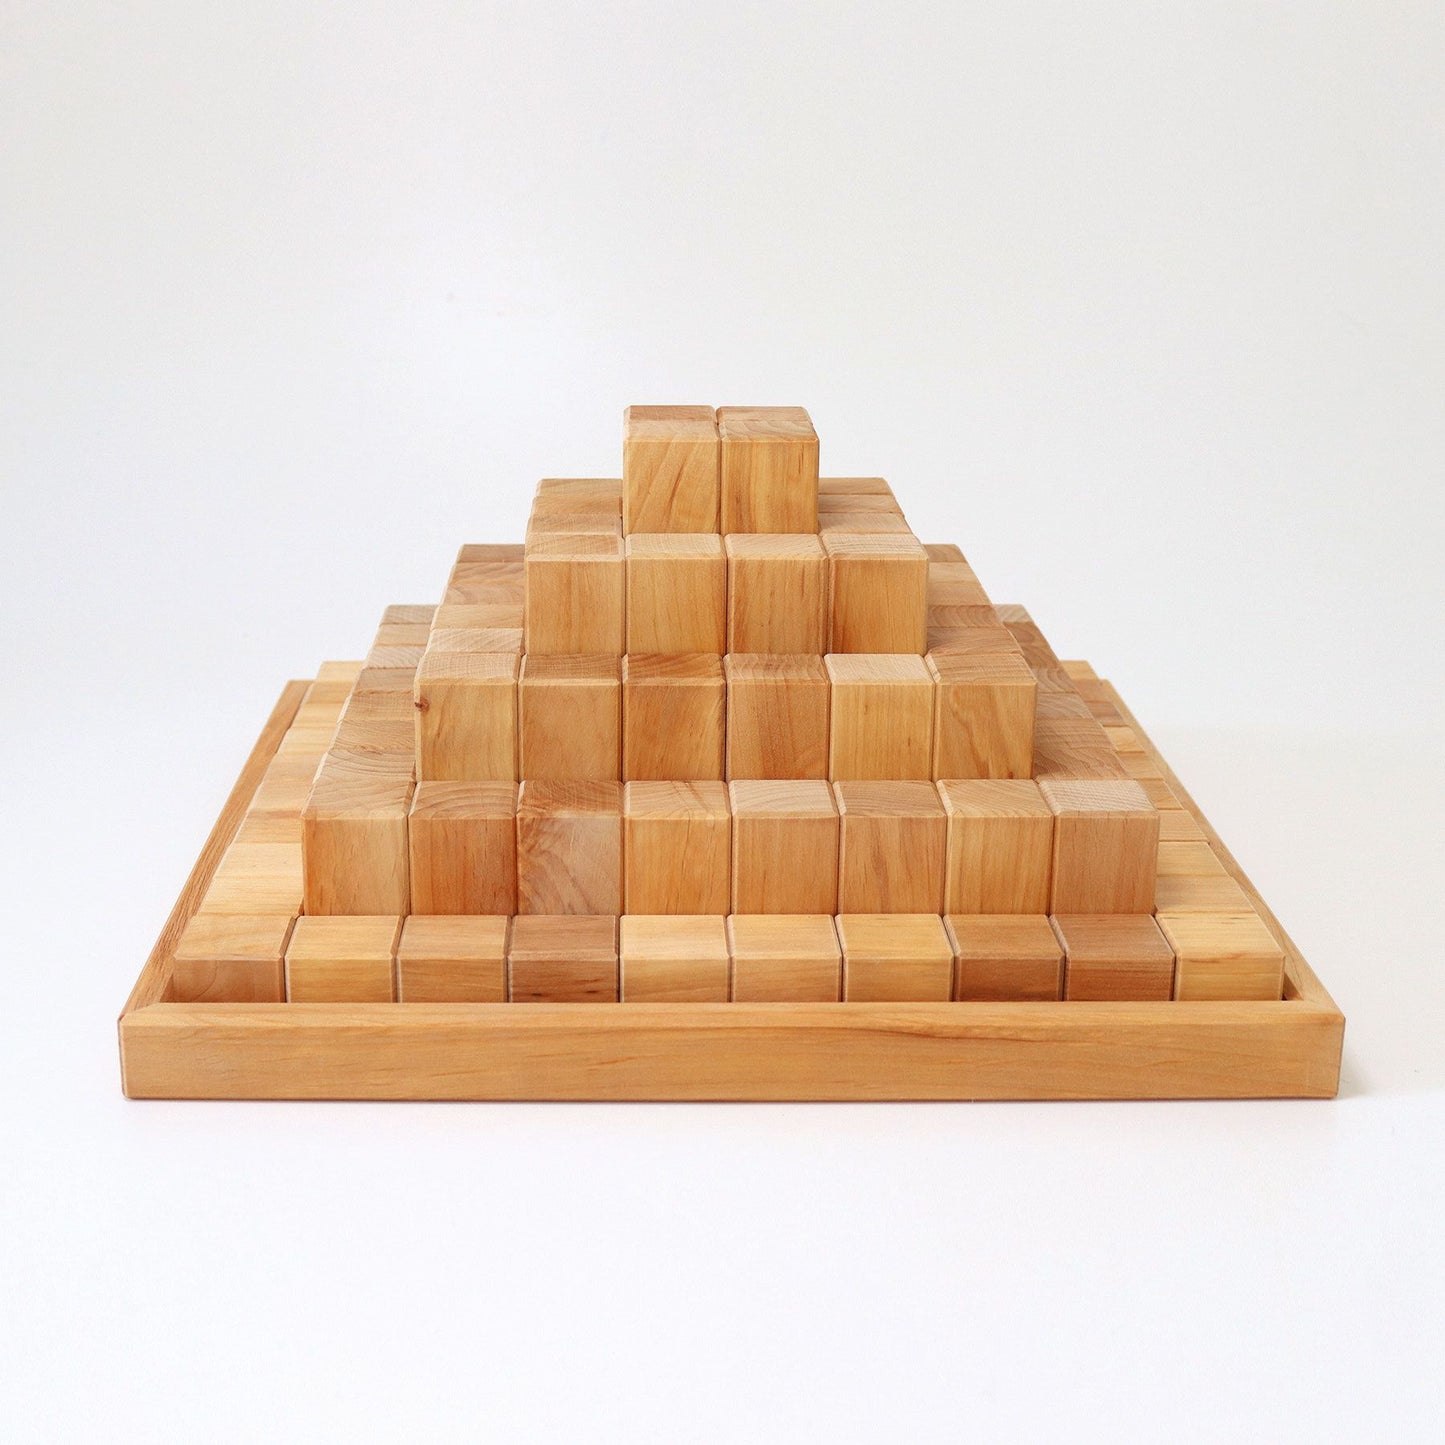 Grimm's Large Natural Stepped Pyramid 2023